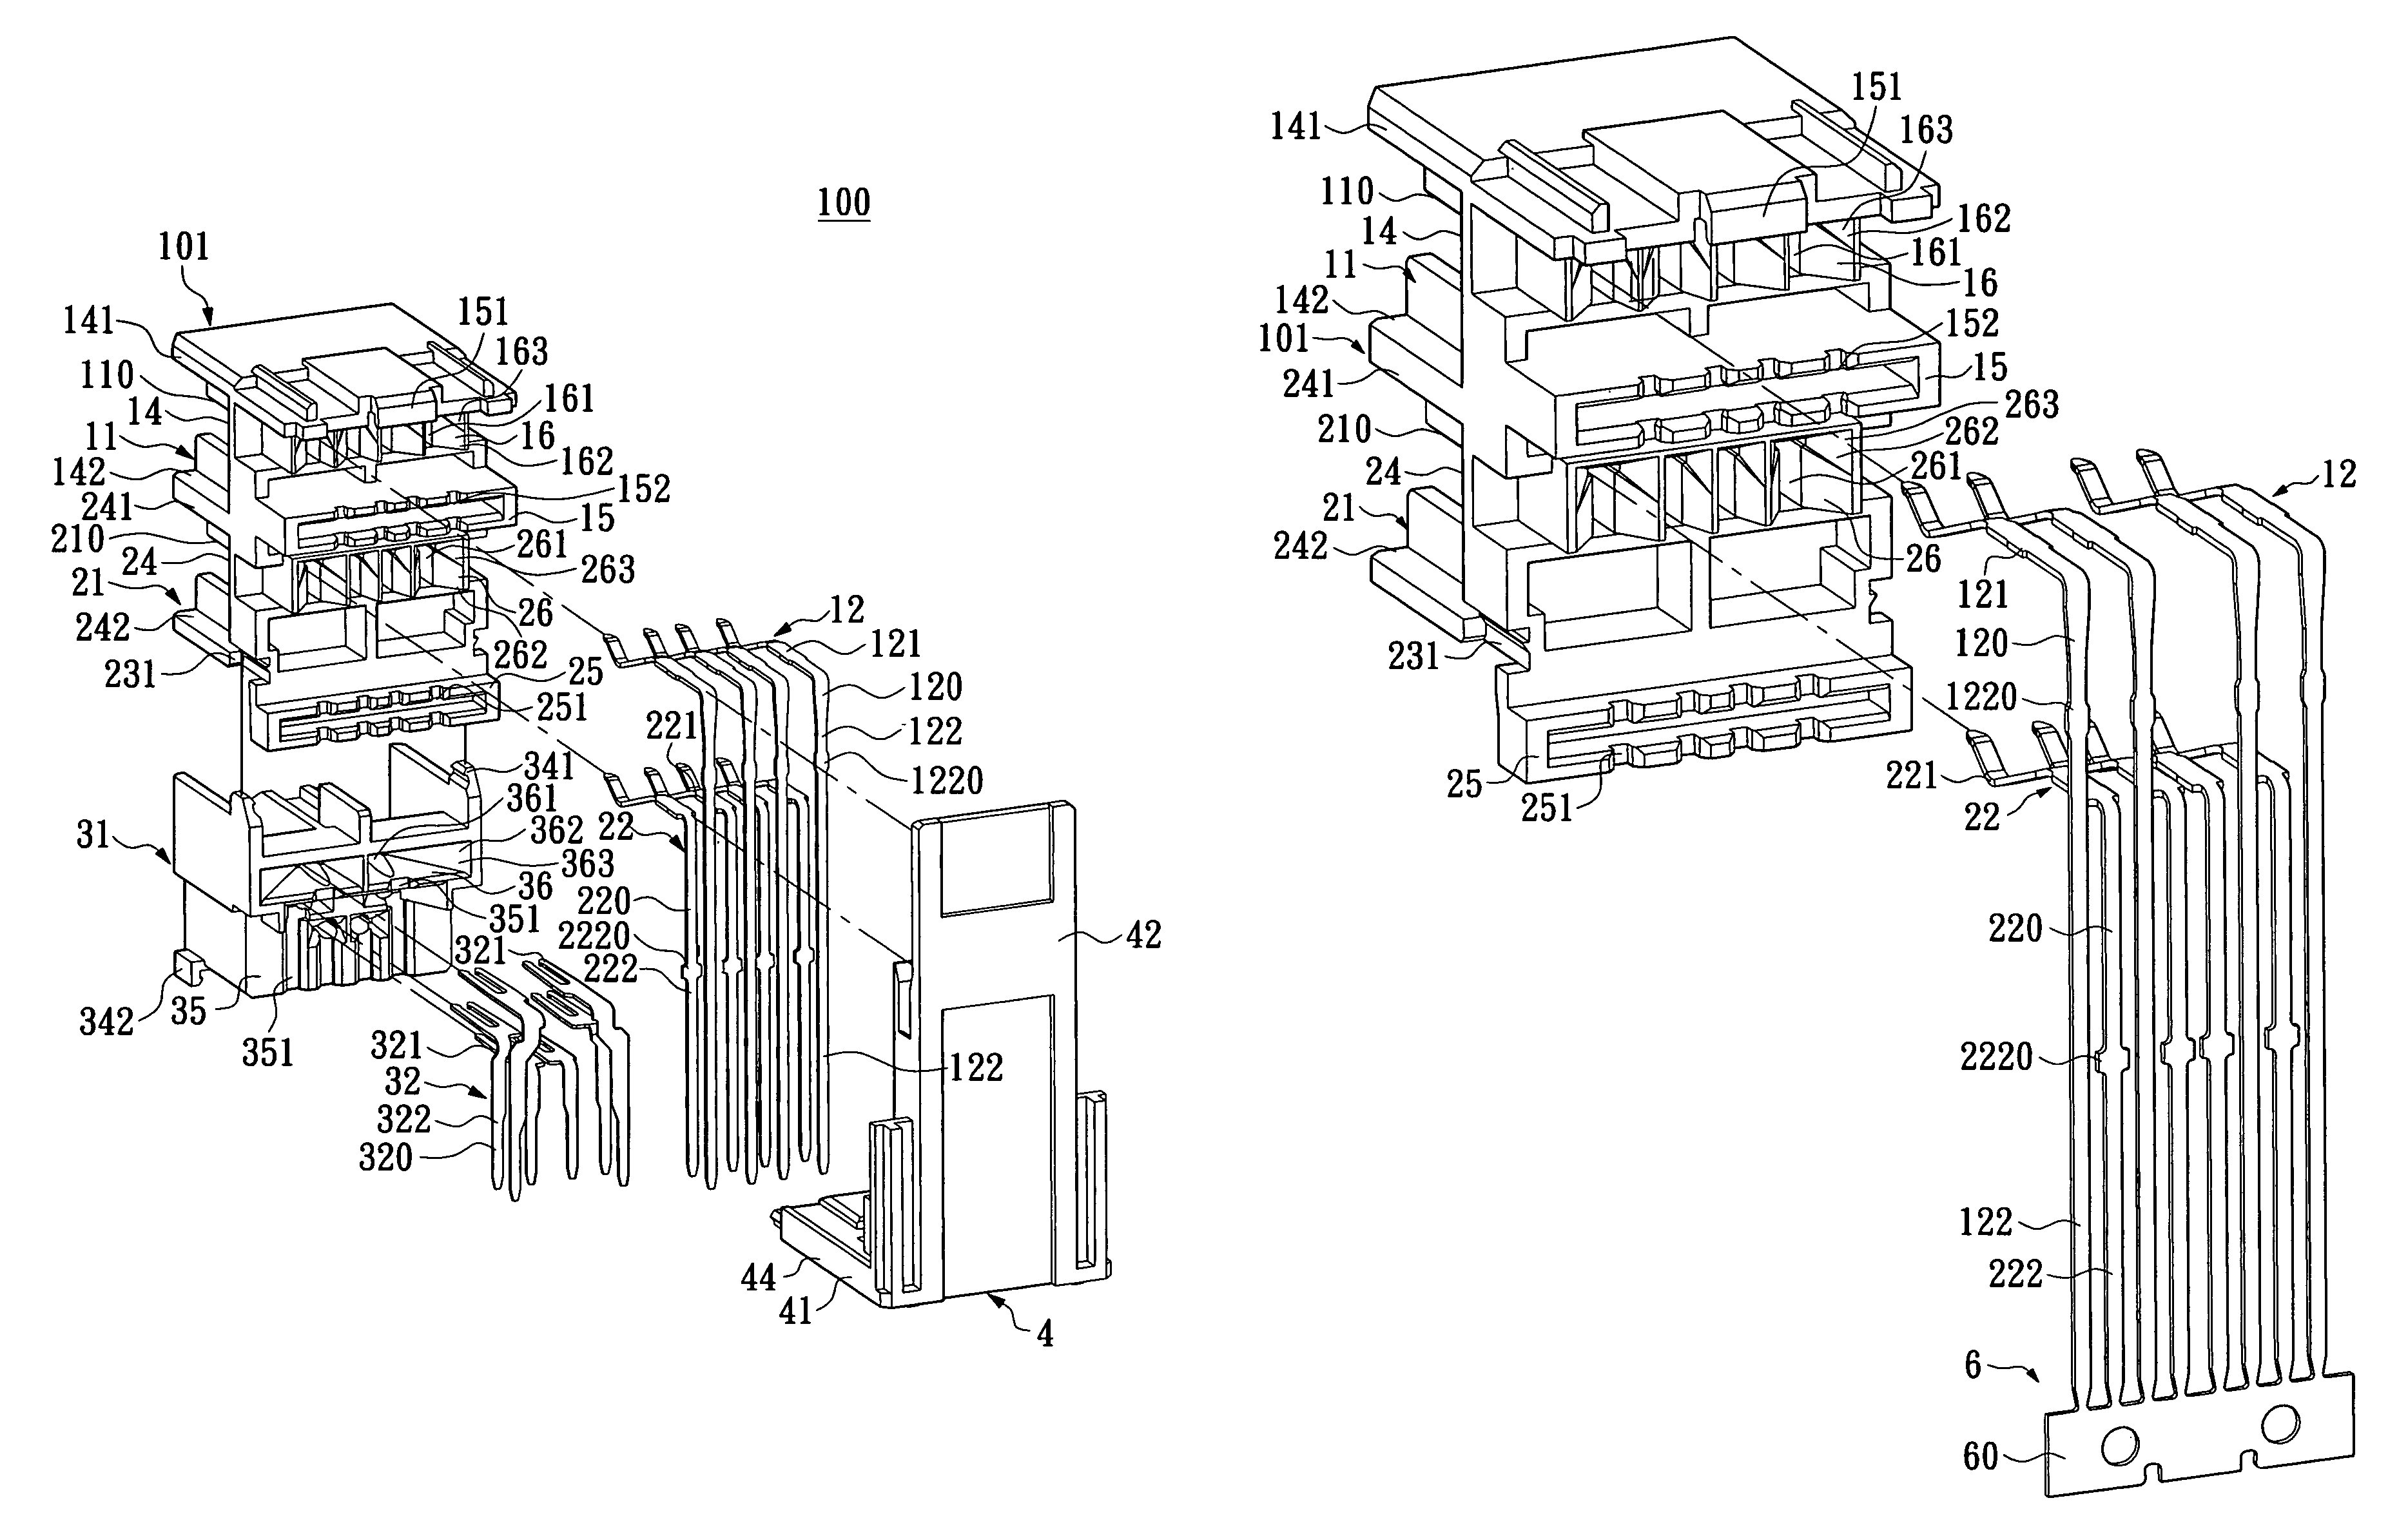 Method of assembling conductive terminals of a plurality of electrical connectors and electrical connector module assembled thereby